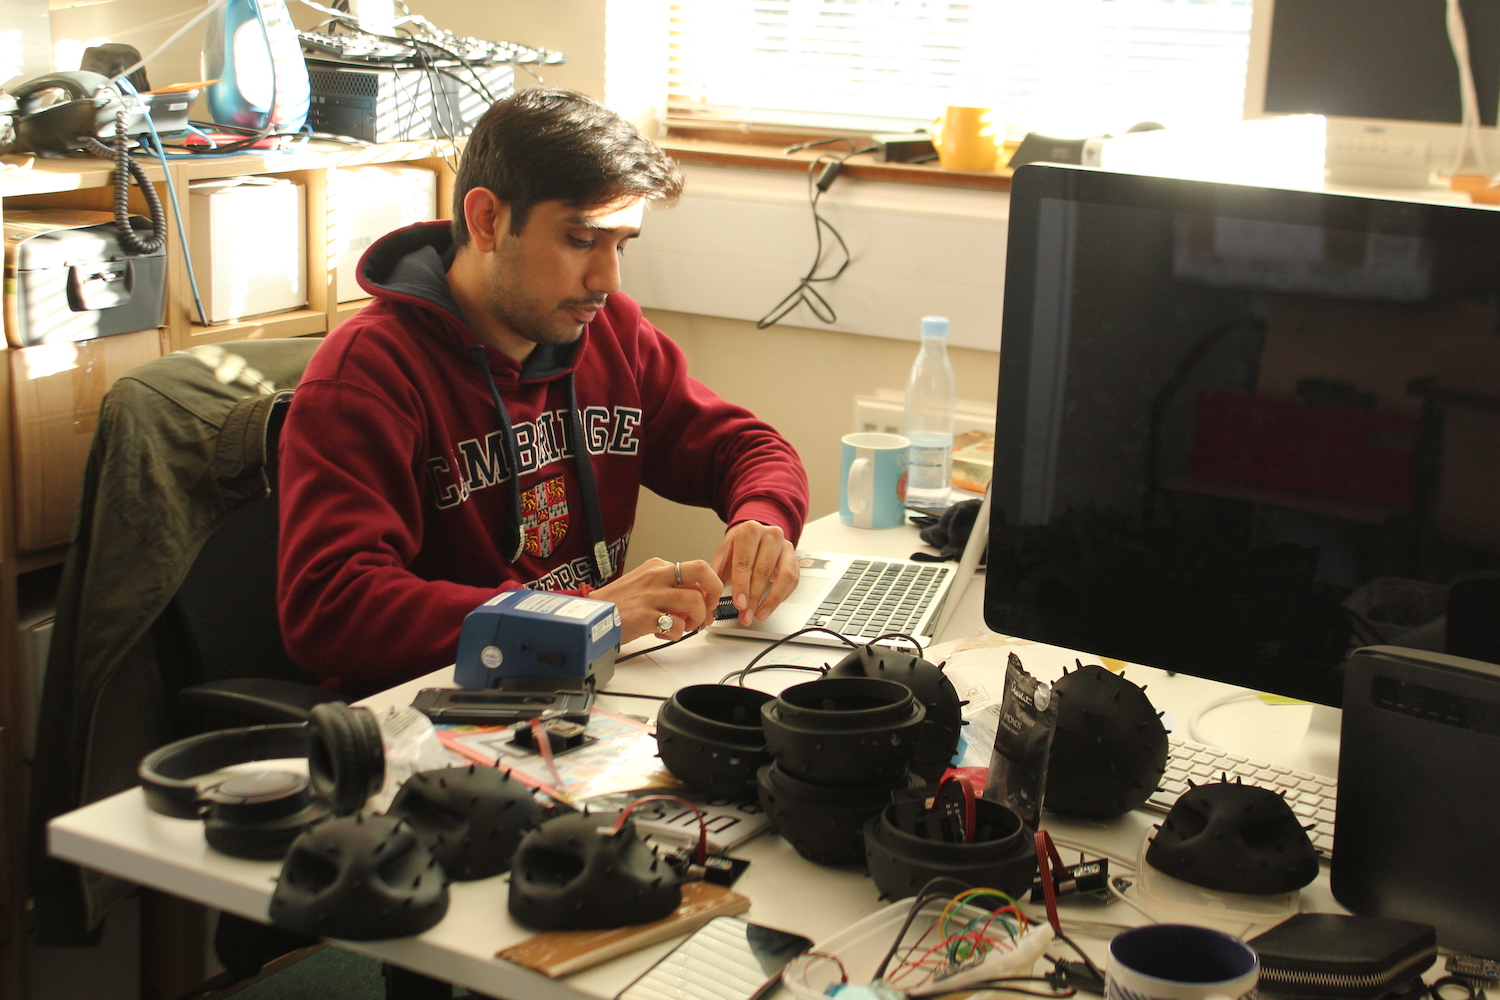 A researchers works at his desk calibrating a sensor. There are Dustbox 2.0 sensors all over the desk